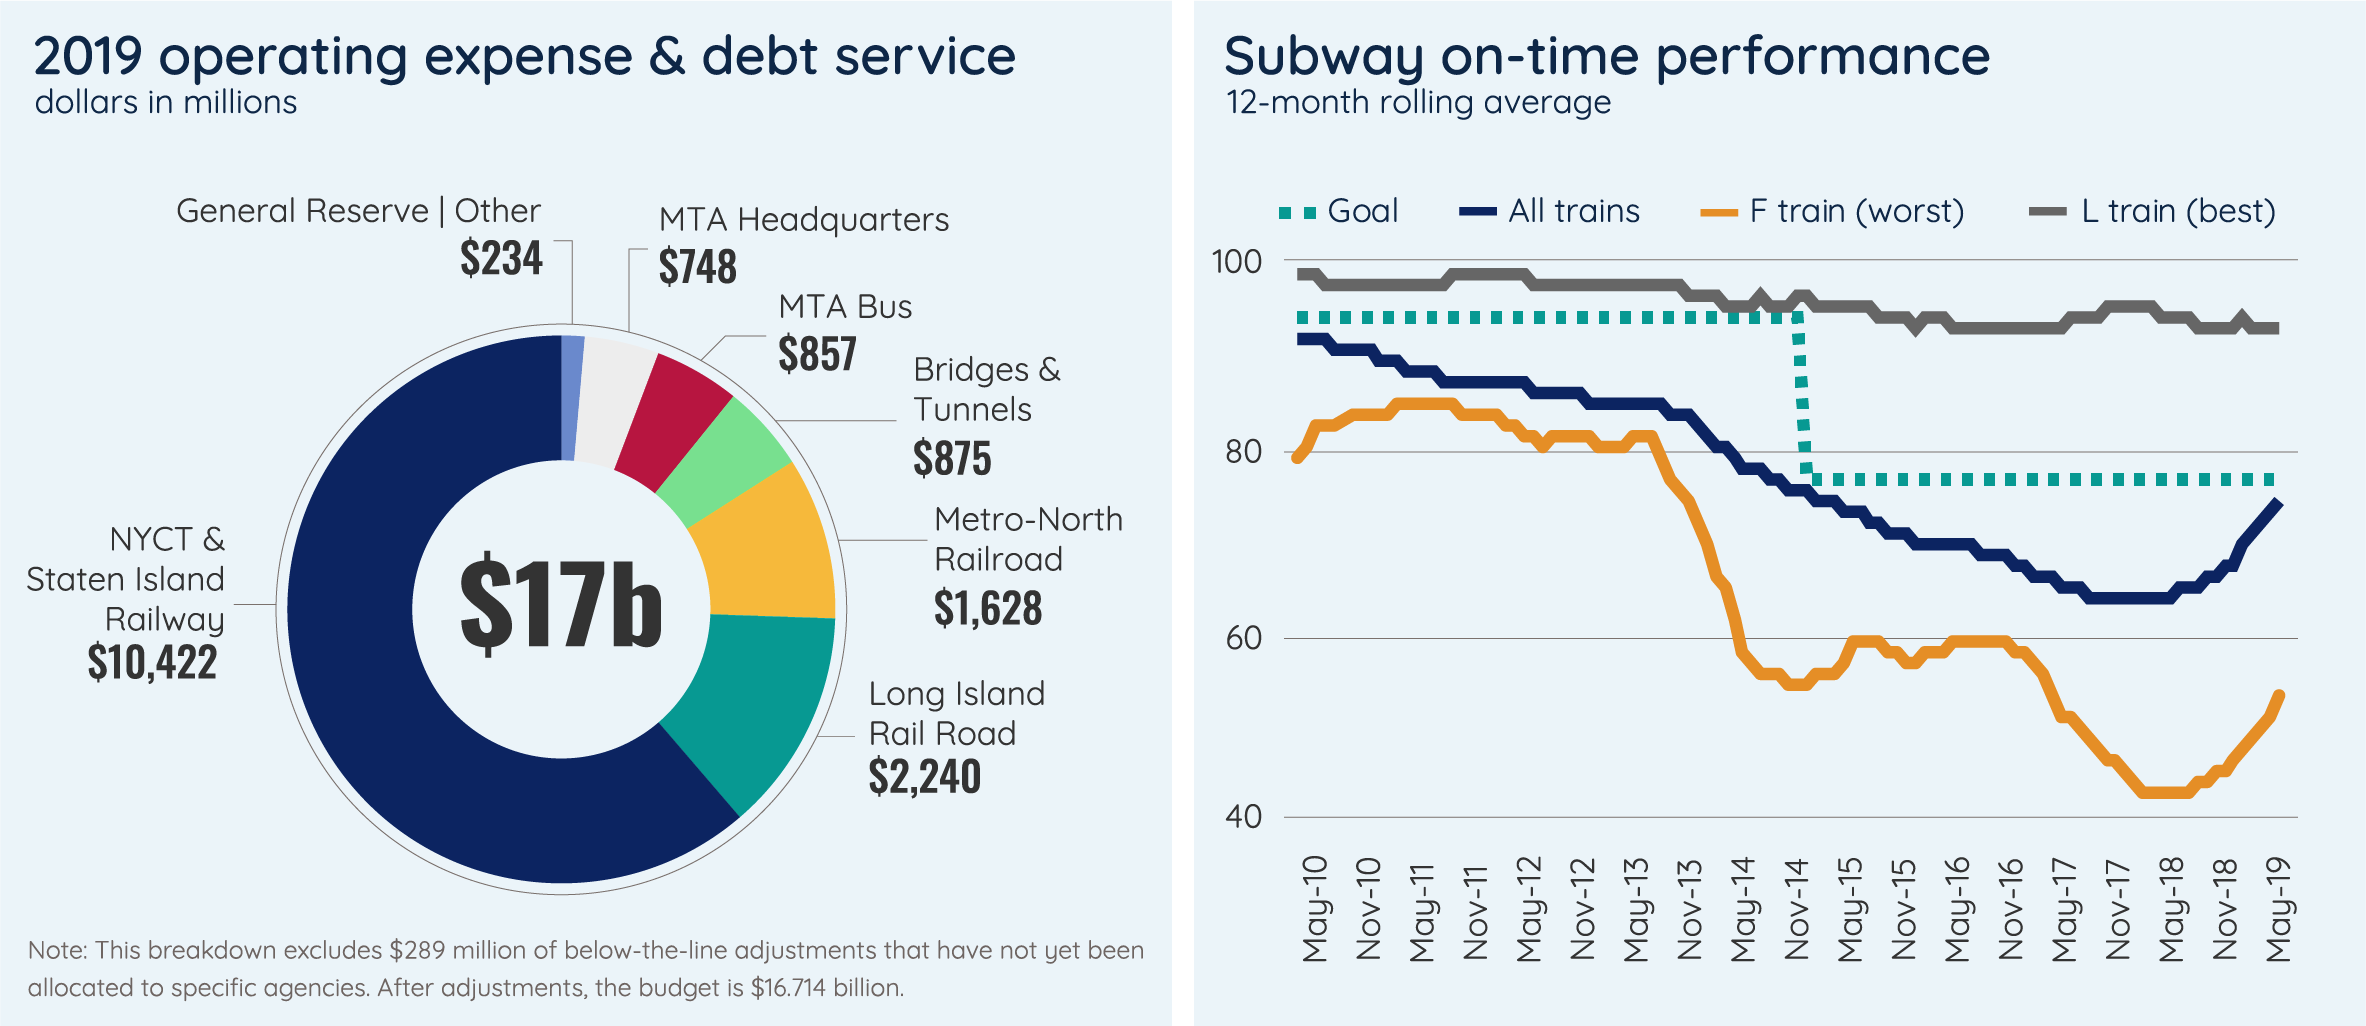 2019 operating expense & debt service/Subway on-time performance